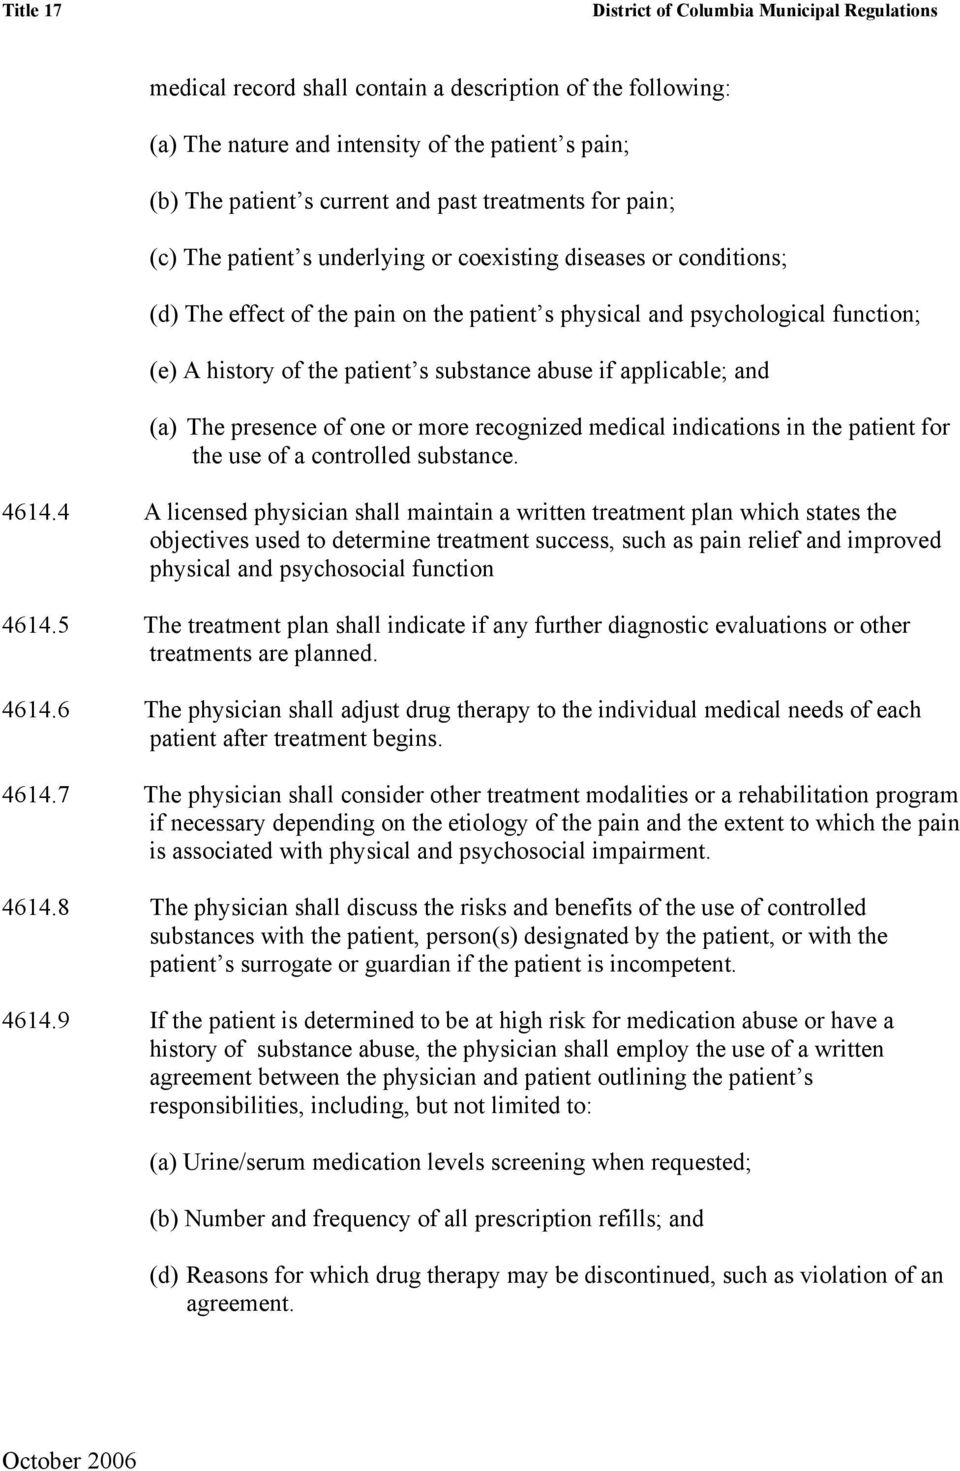 presence of one or more recognized medical indications in the patient for the use of a controlled substance. 4614.